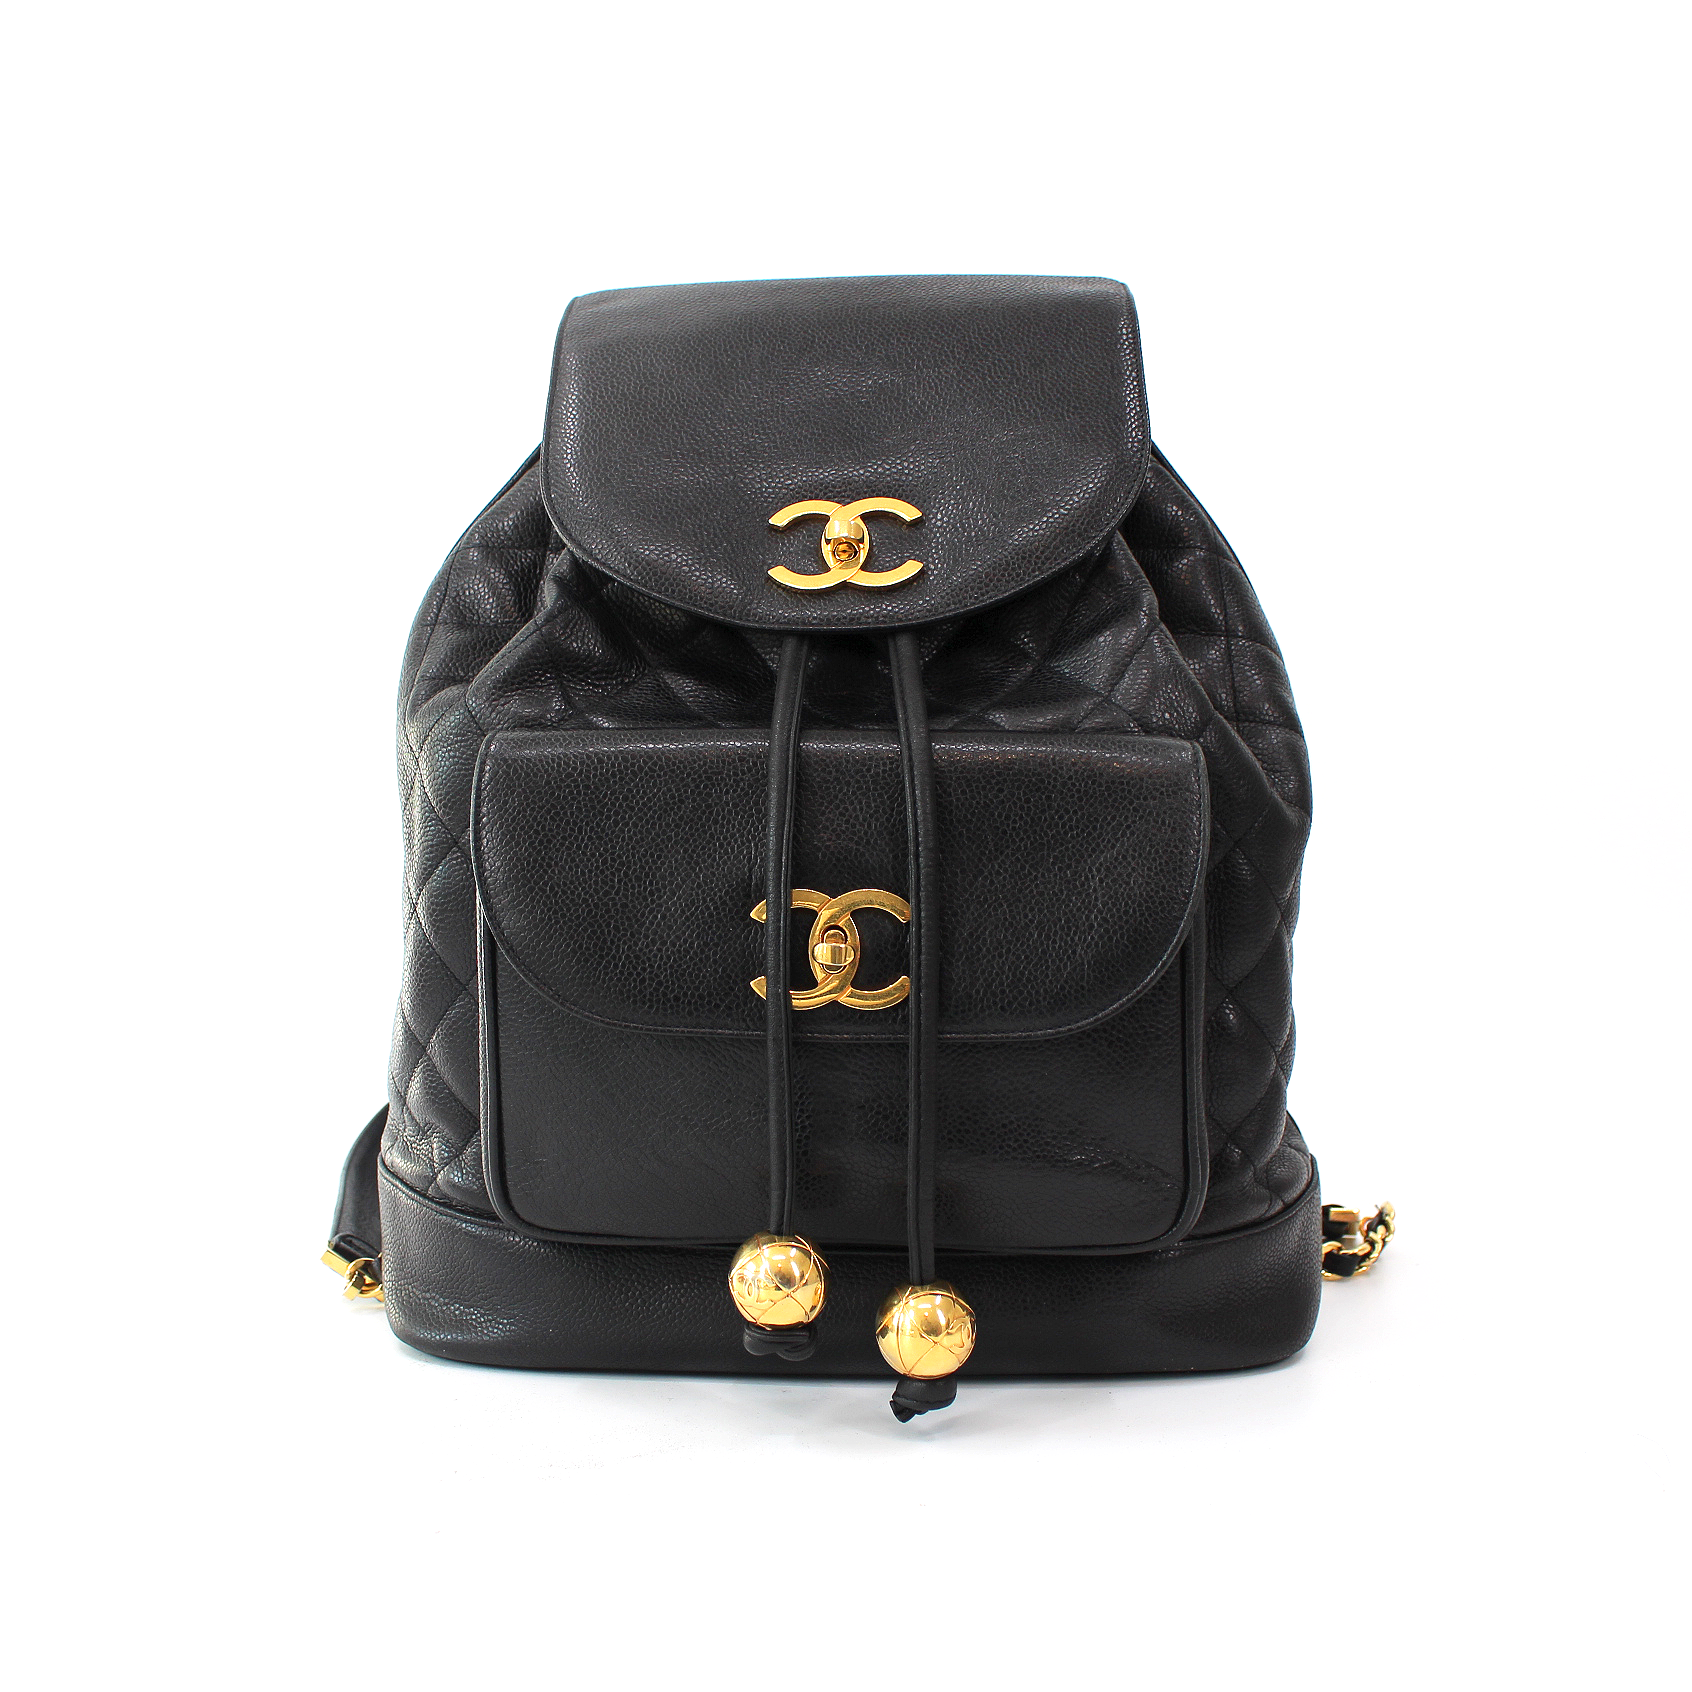 CHANEL Backpacks for Women | Authenticity Guaranteed | eBay